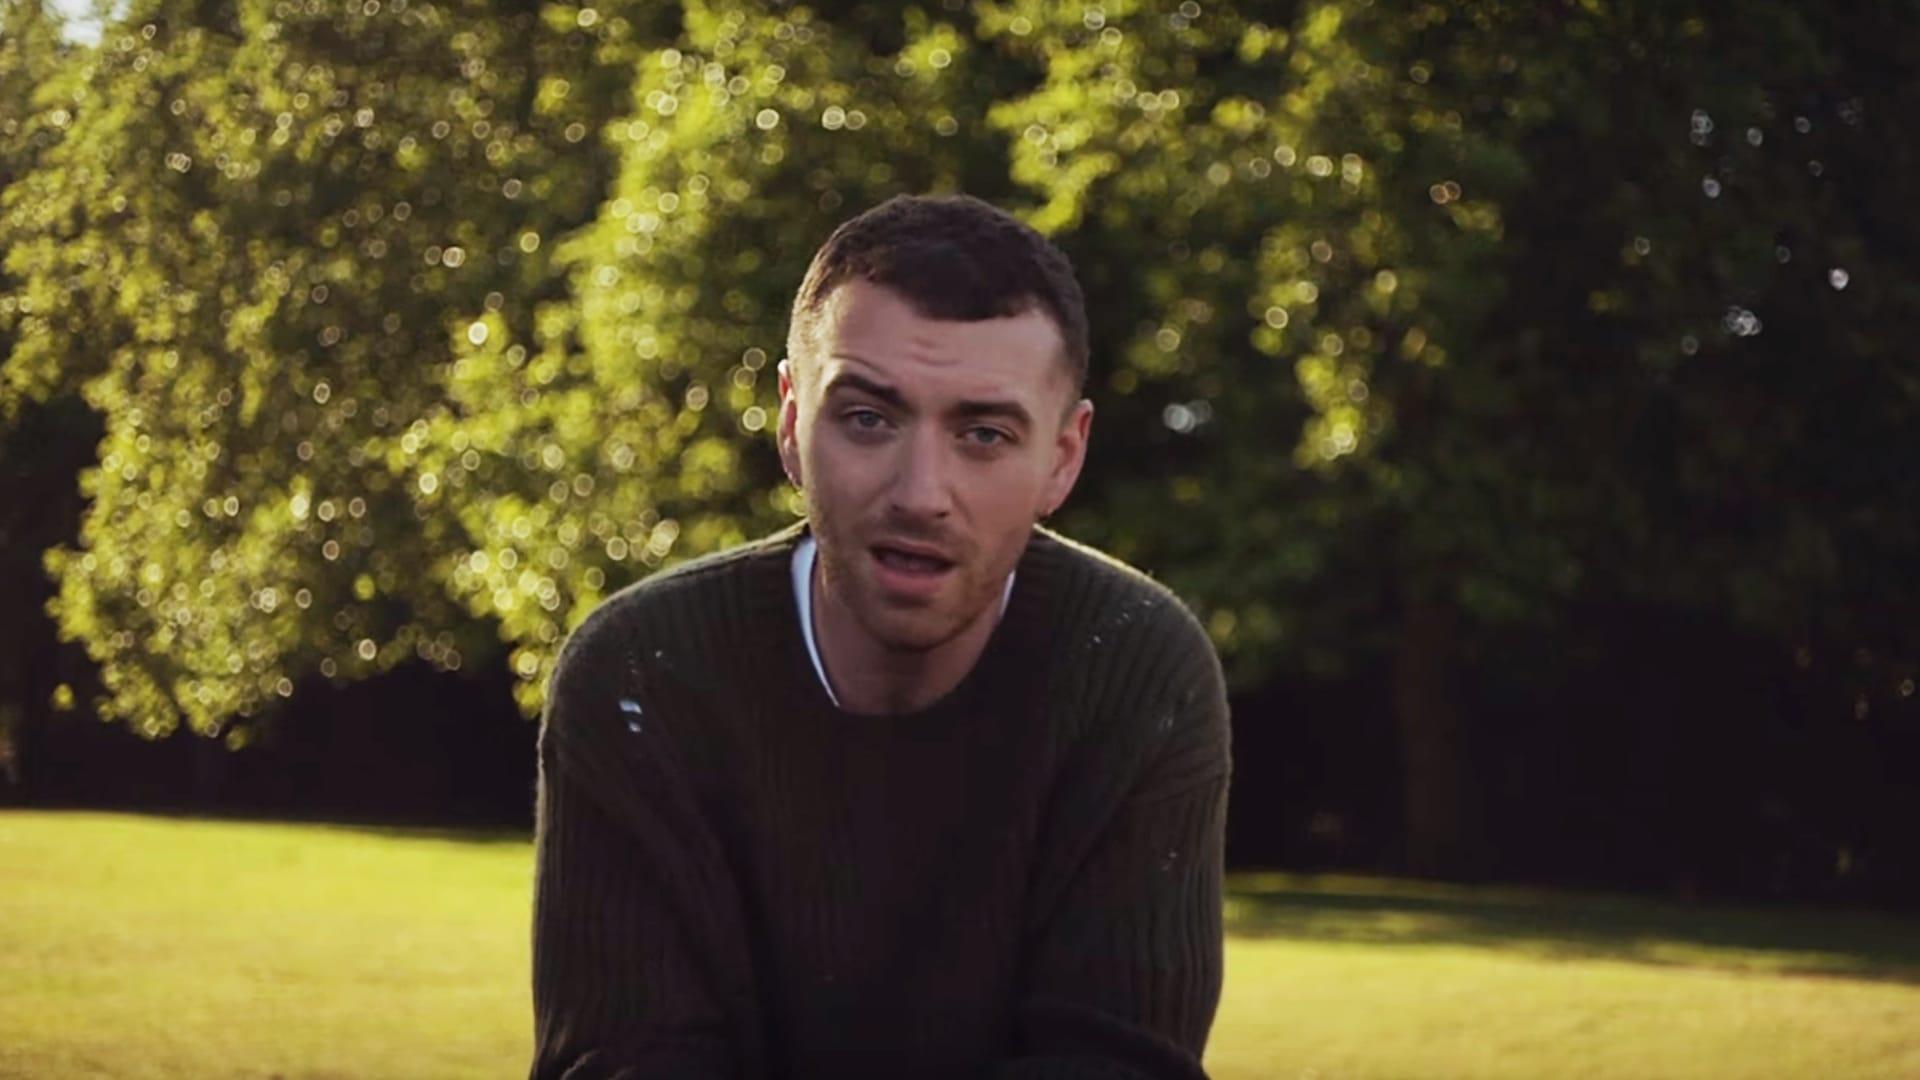 On the Record: Sam Smith - The Thrill of It All backdrop